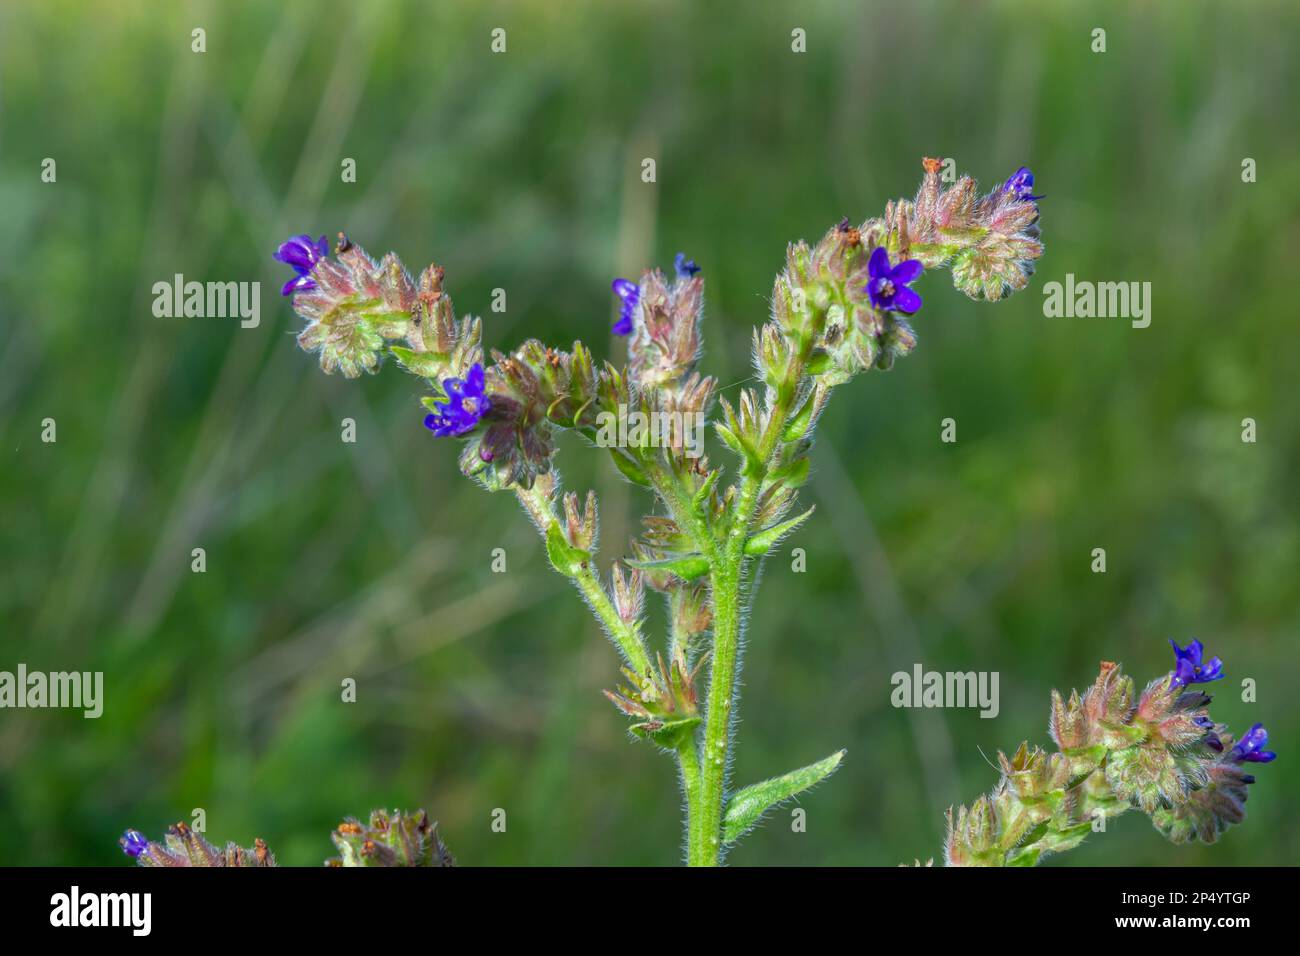 Anchusa officinalis, Alkanet, Common bugloss. Summer, dawn. Dew drops lie on the plant. Beautiful green background. Stock Photo